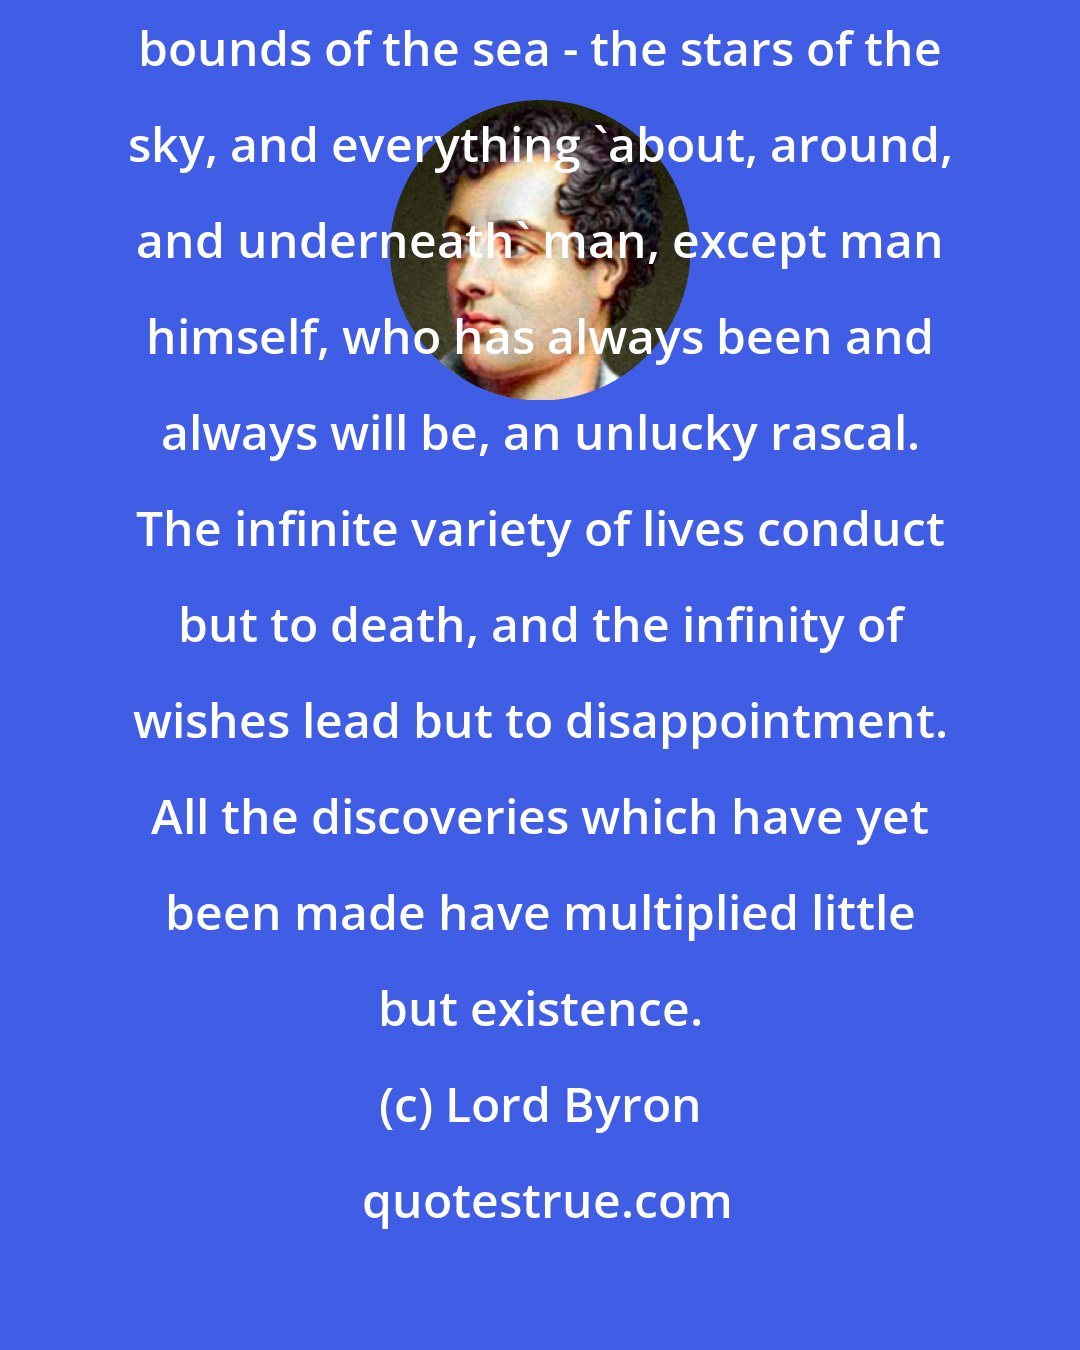 Lord Byron: The lapse of ages changes all things - time - language - the earth - the bounds of the sea - the stars of the sky, and everything 'about, around, and underneath' man, except man himself, who has always been and always will be, an unlucky rascal. The infinite variety of lives conduct but to death, and the infinity of wishes lead but to disappointment. All the discoveries which have yet been made have multiplied little but existence.